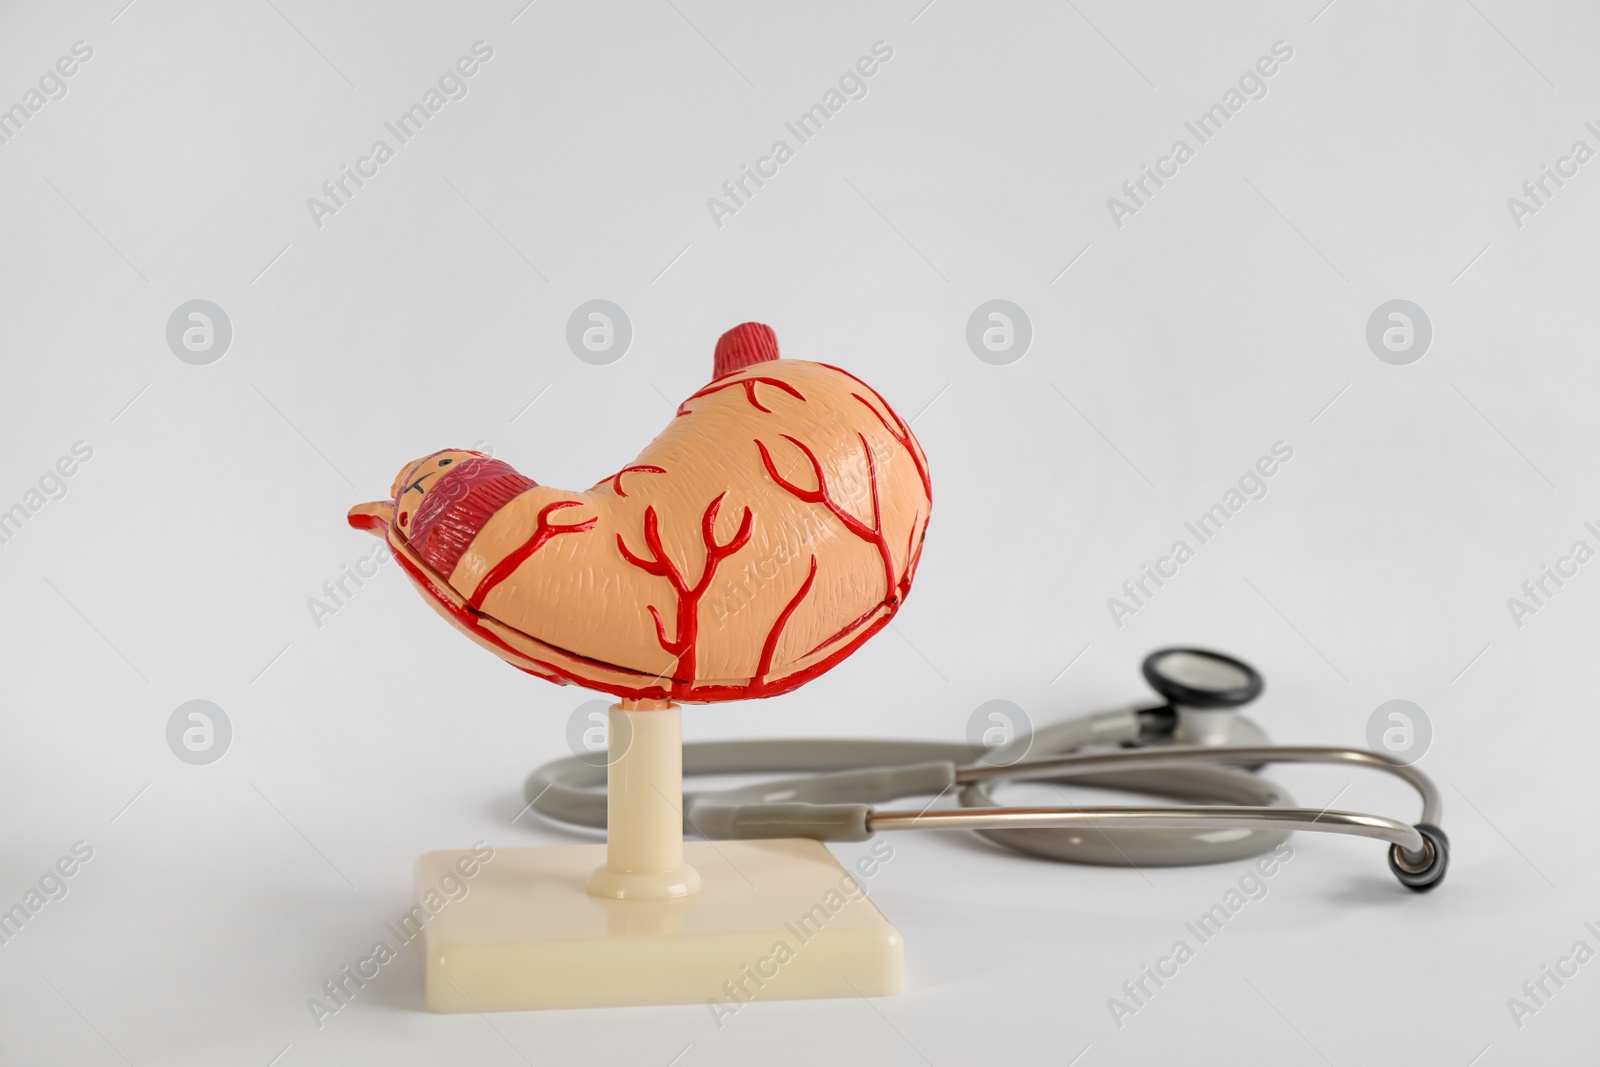 Photo of Human stomach model and stethoscope on light grey background